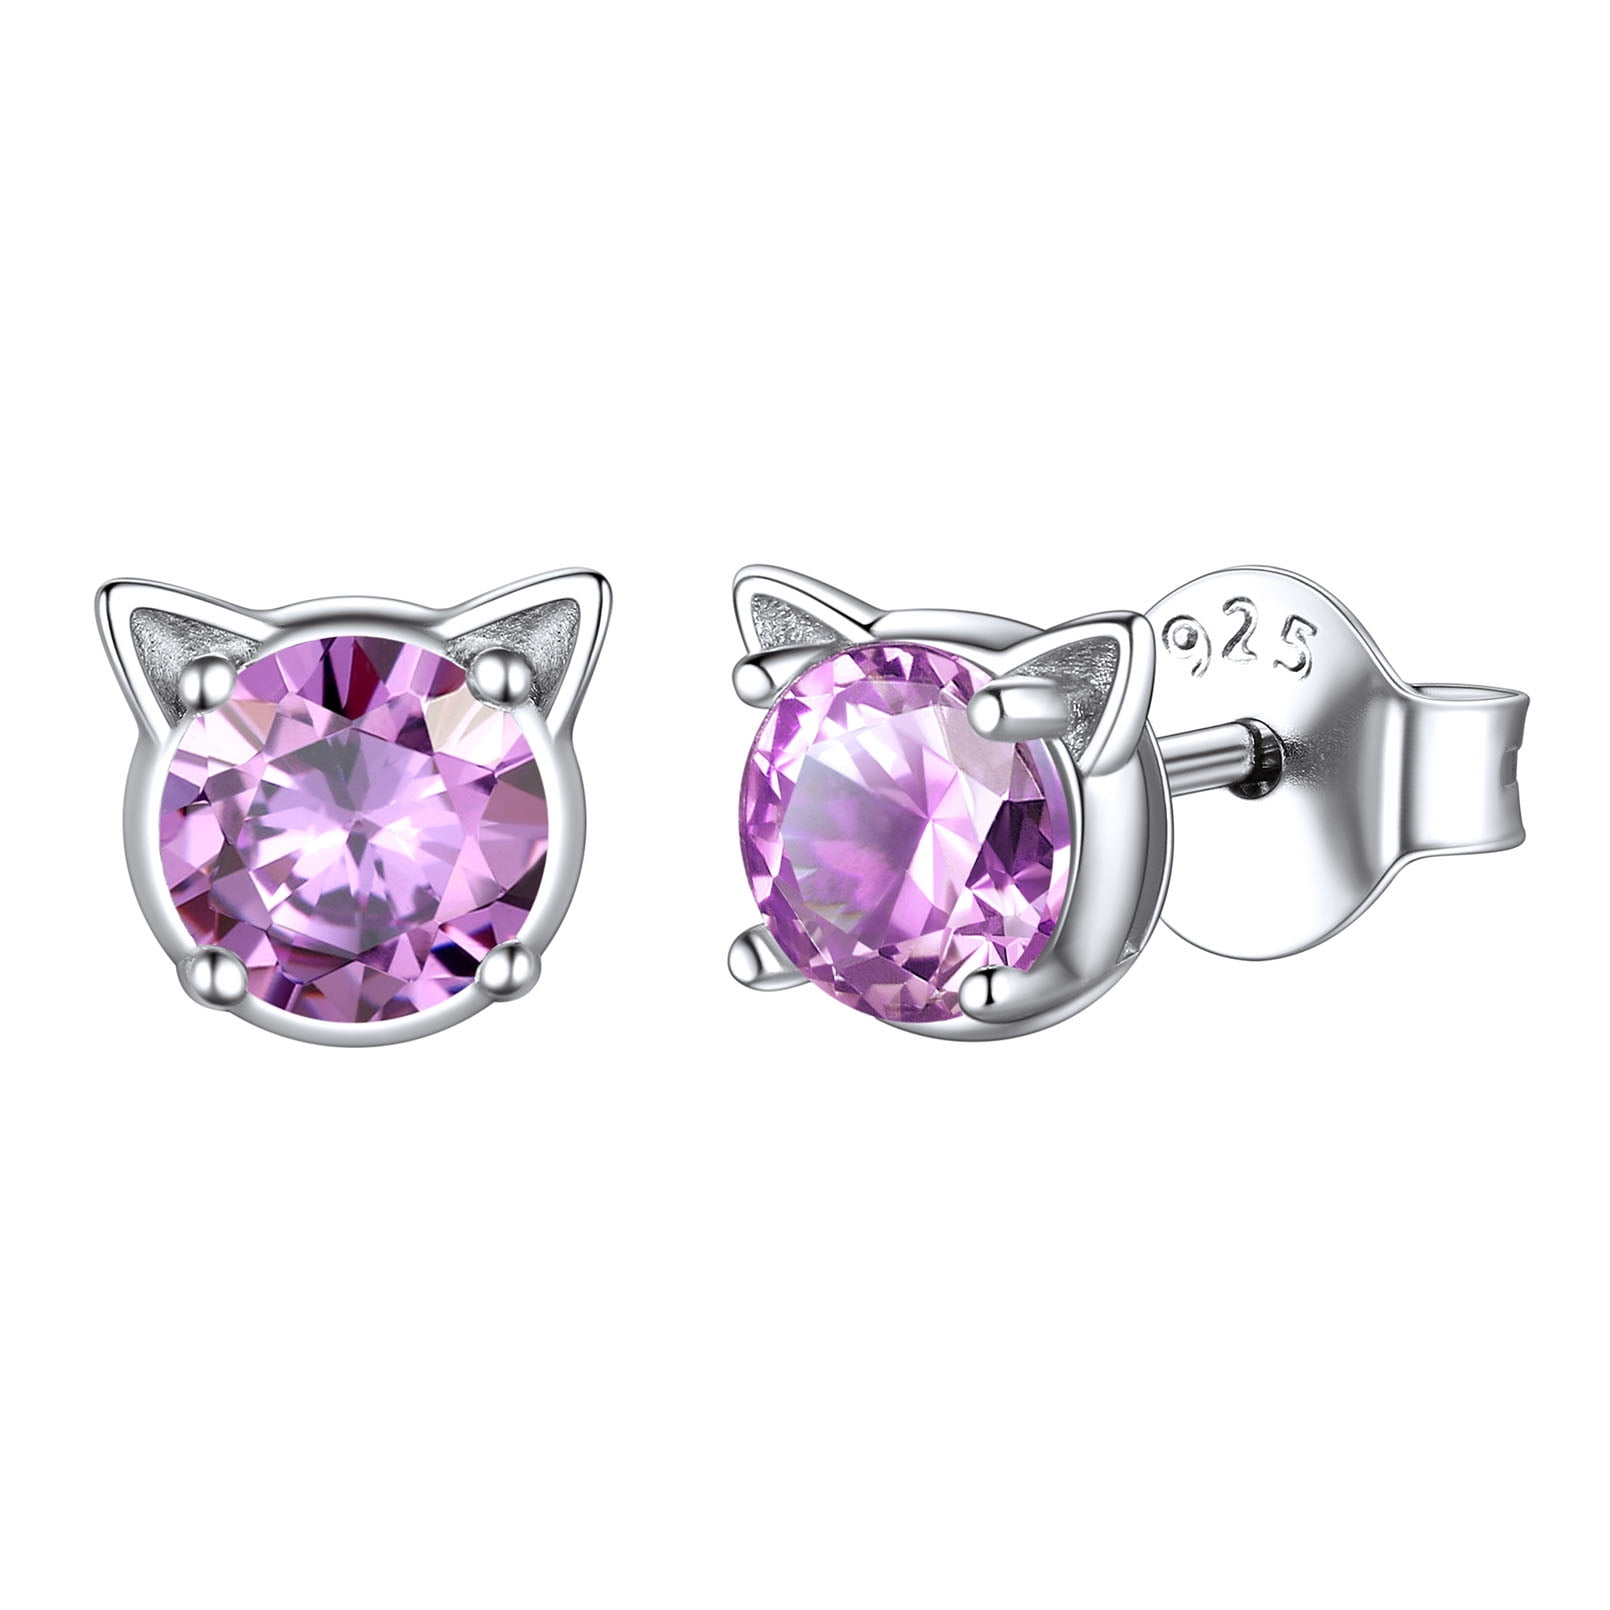 925 Sterling Silver Kitty Cat Screw Back Earrings for Young Girls & Pre- Teens, Small Cat - Body Pierce Jewelry